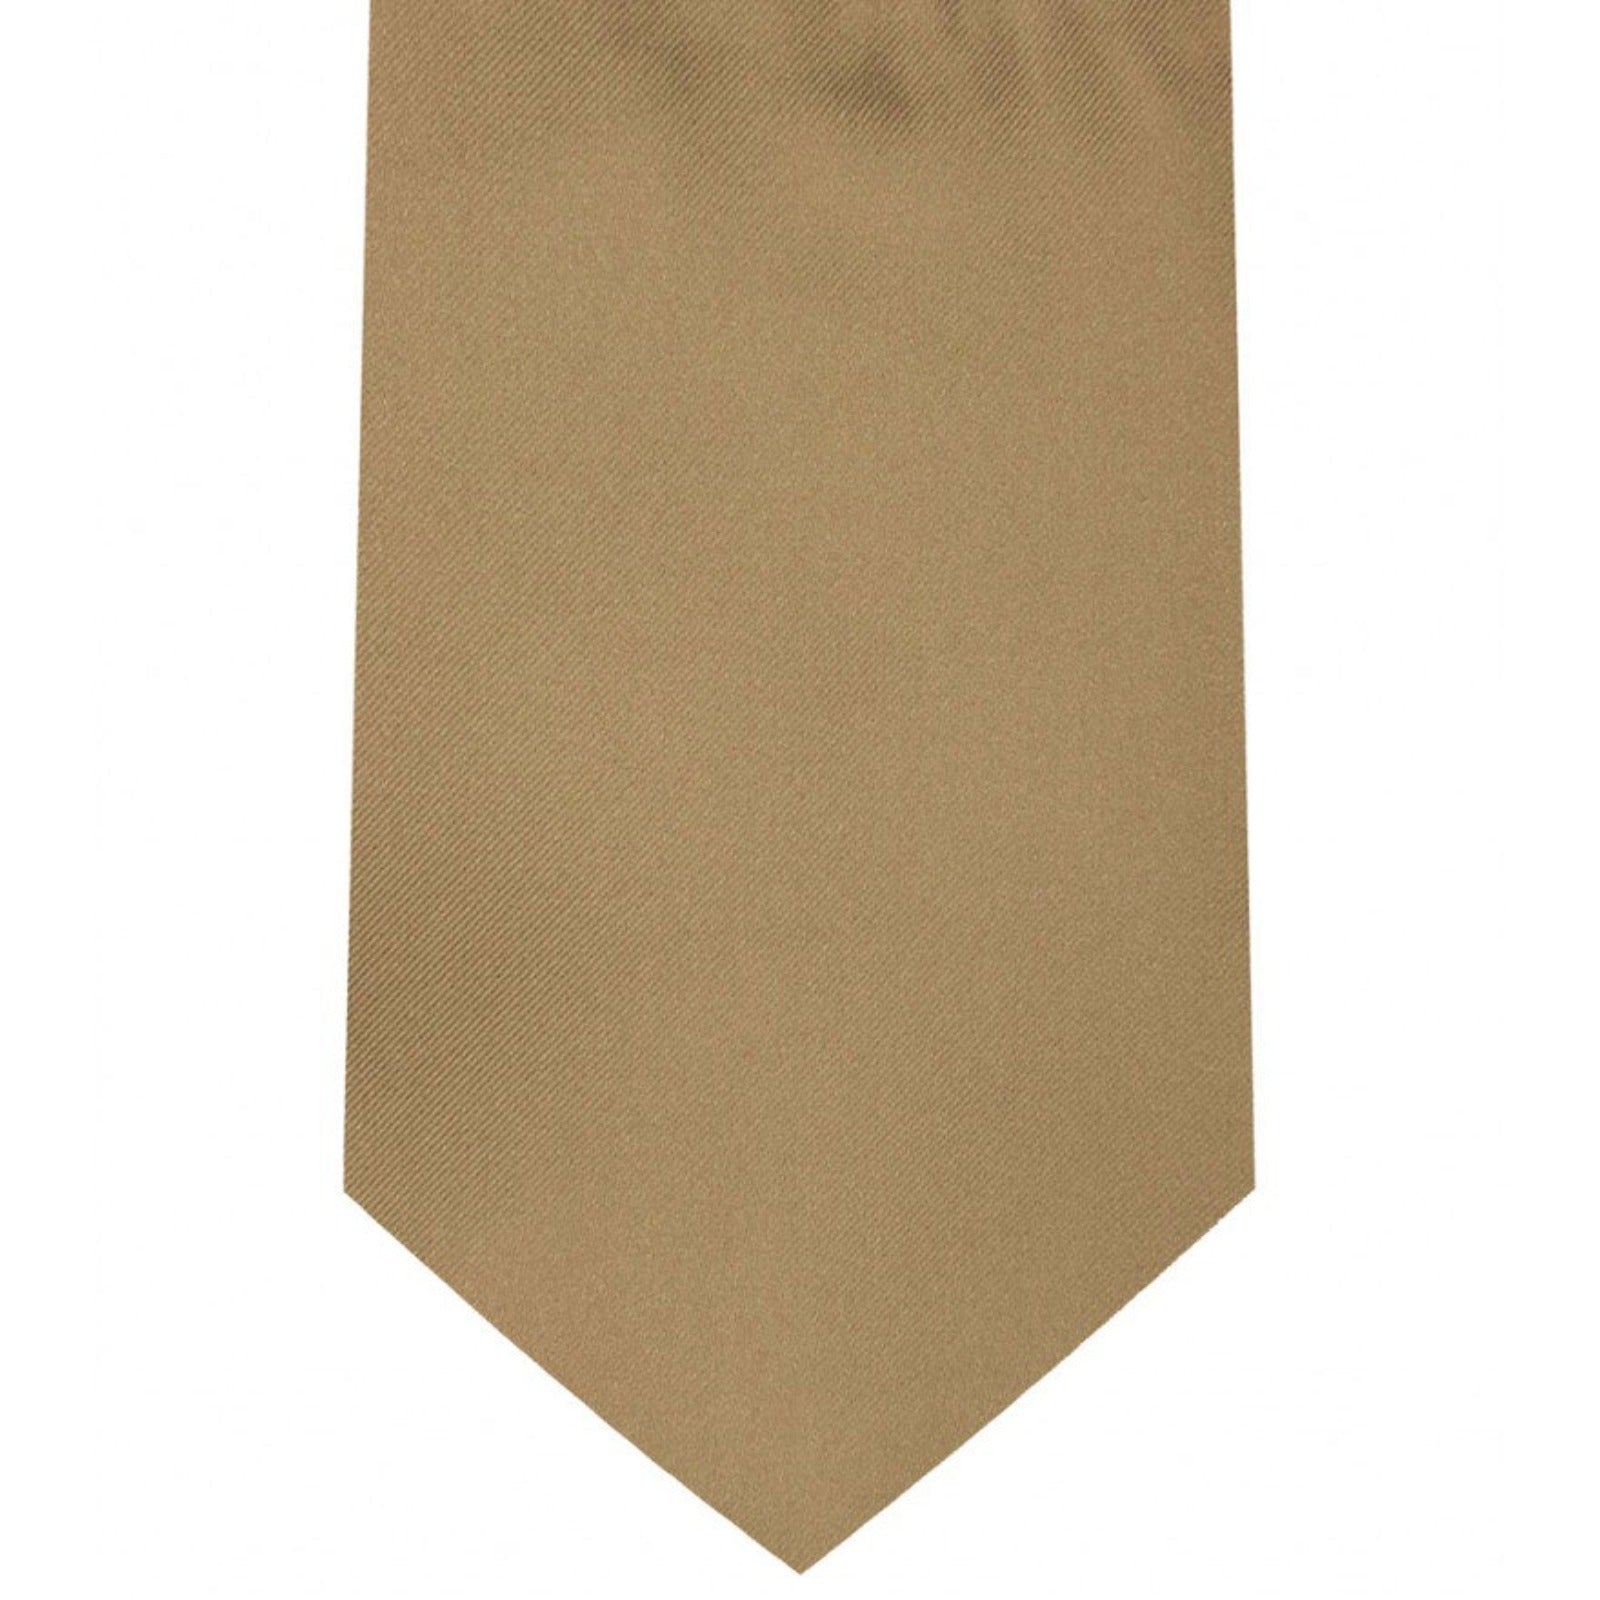 Classic Taupe Tie Regular width 3.5 inches With Matching Pocket Square | KCT Menswear 